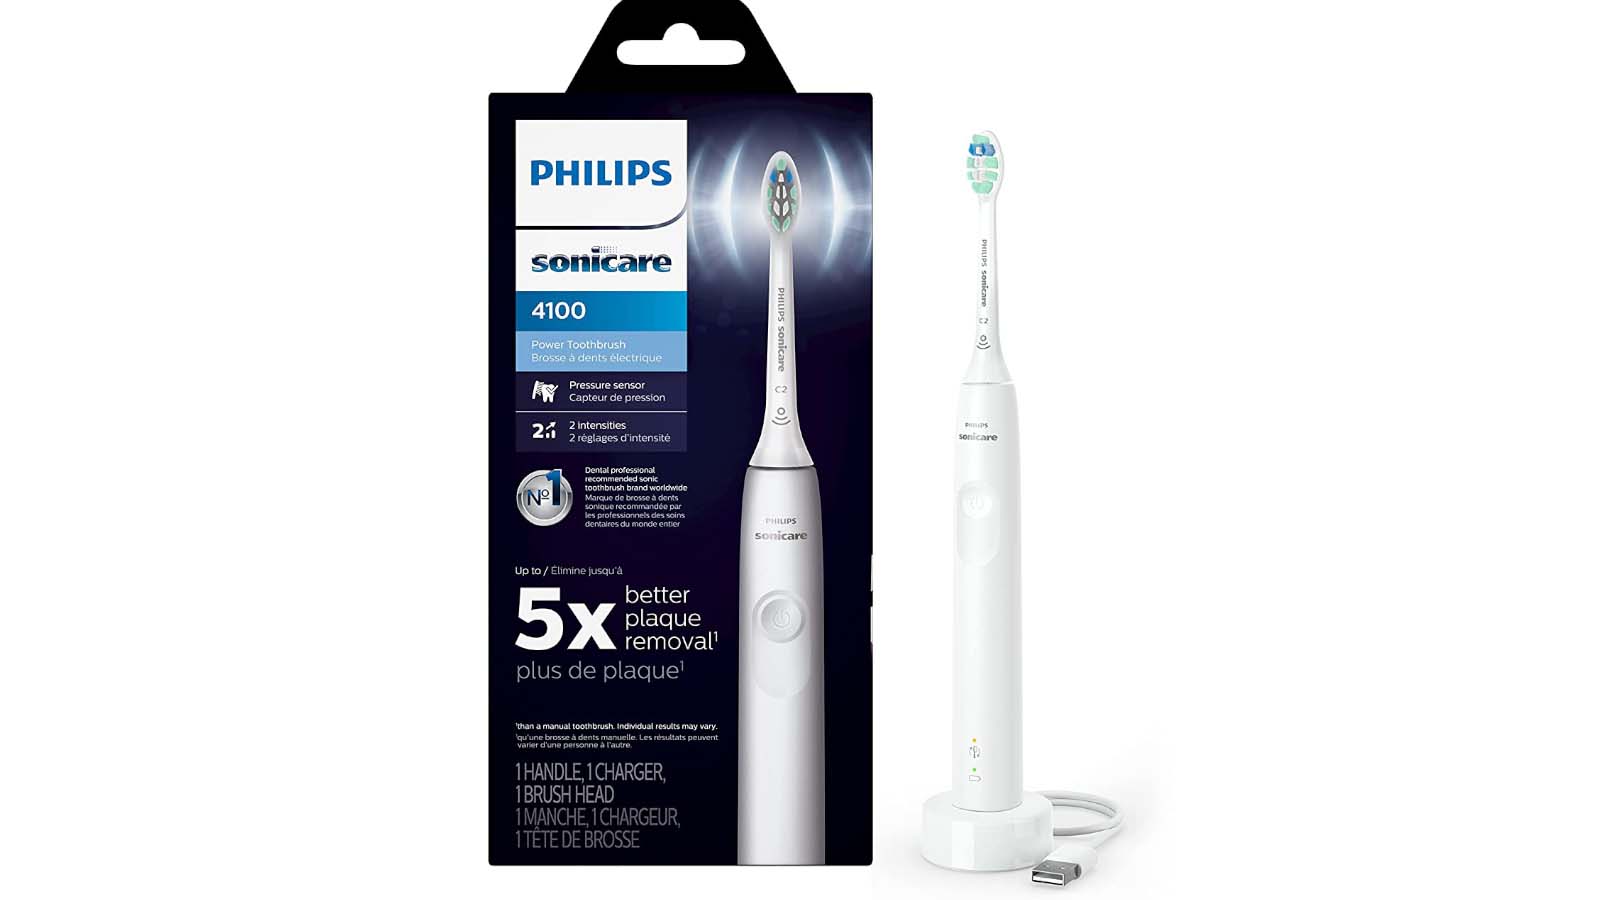 Review of Philips Sonicare 4100 - Philips Sonicare ProtectiveClean 4100 (White, HX3681/23) toothbrush and its packaging